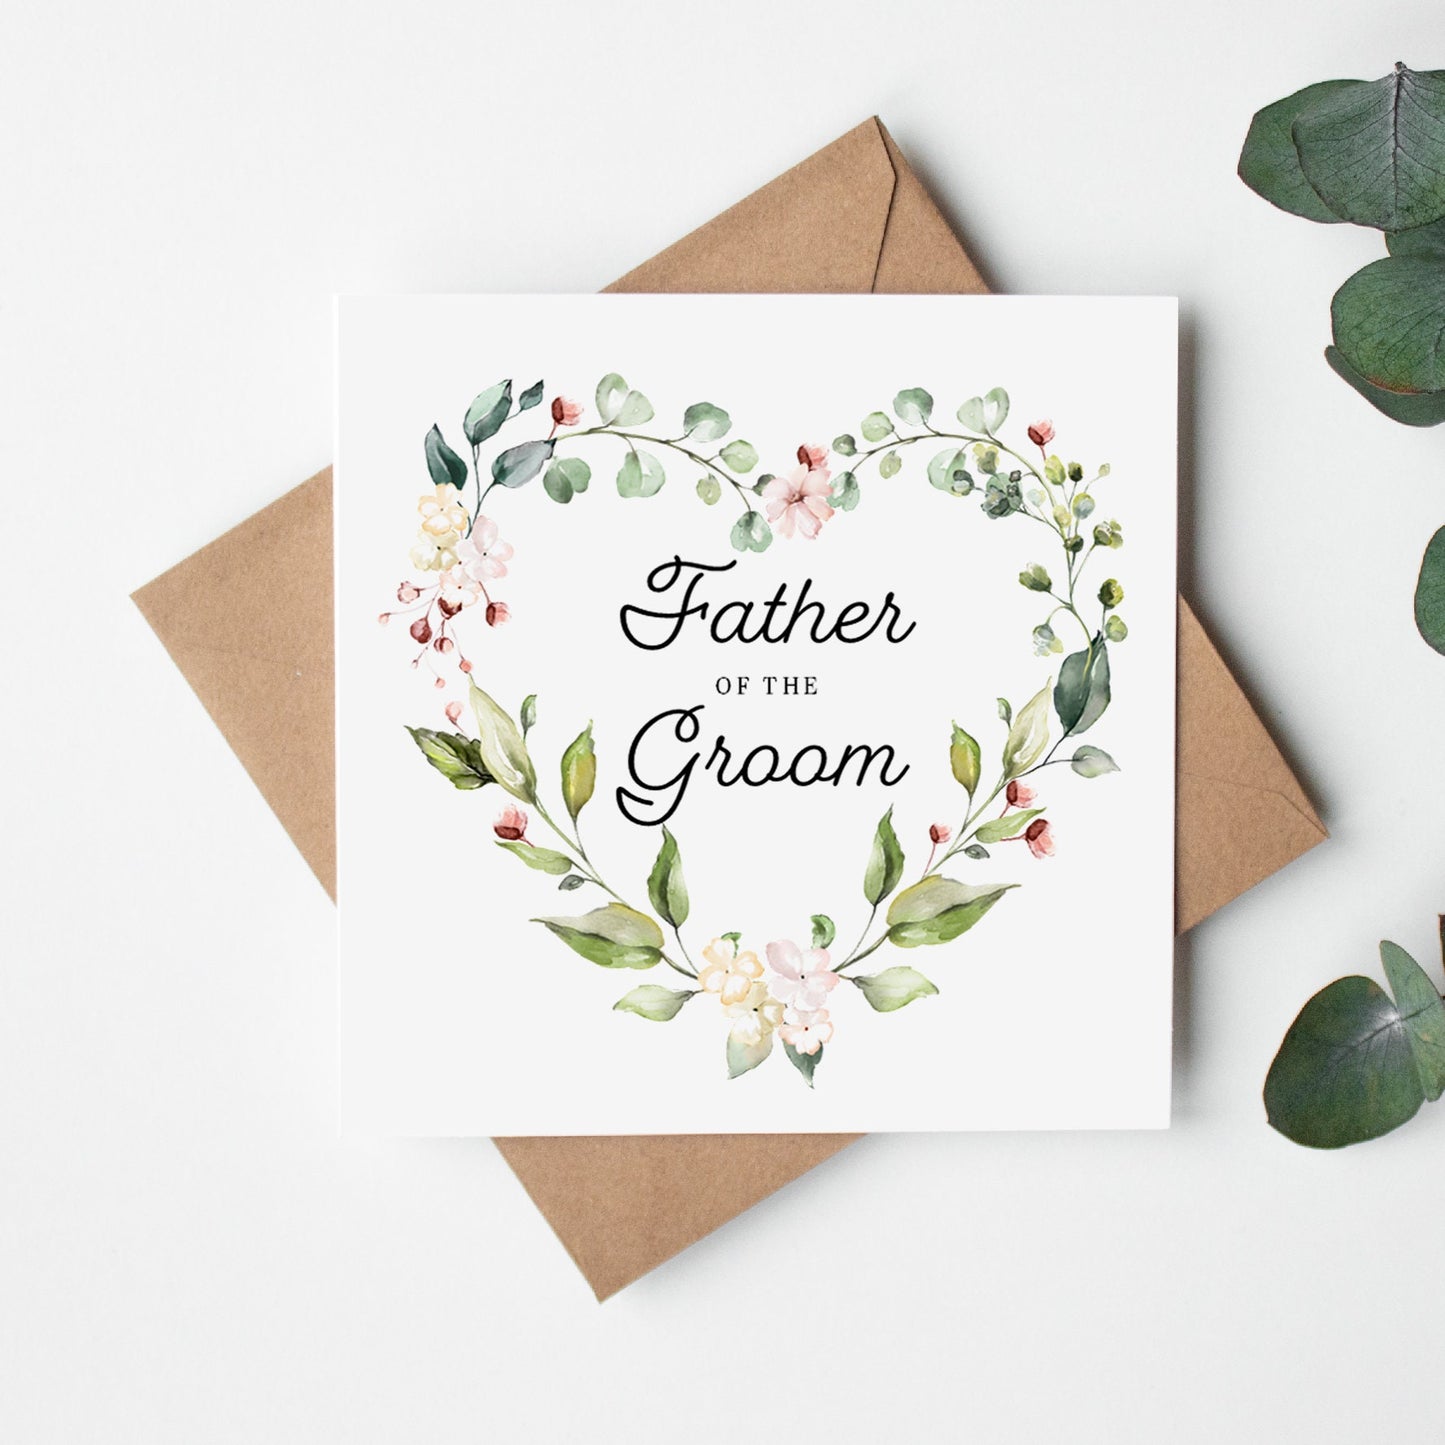 Father of the Groom Card